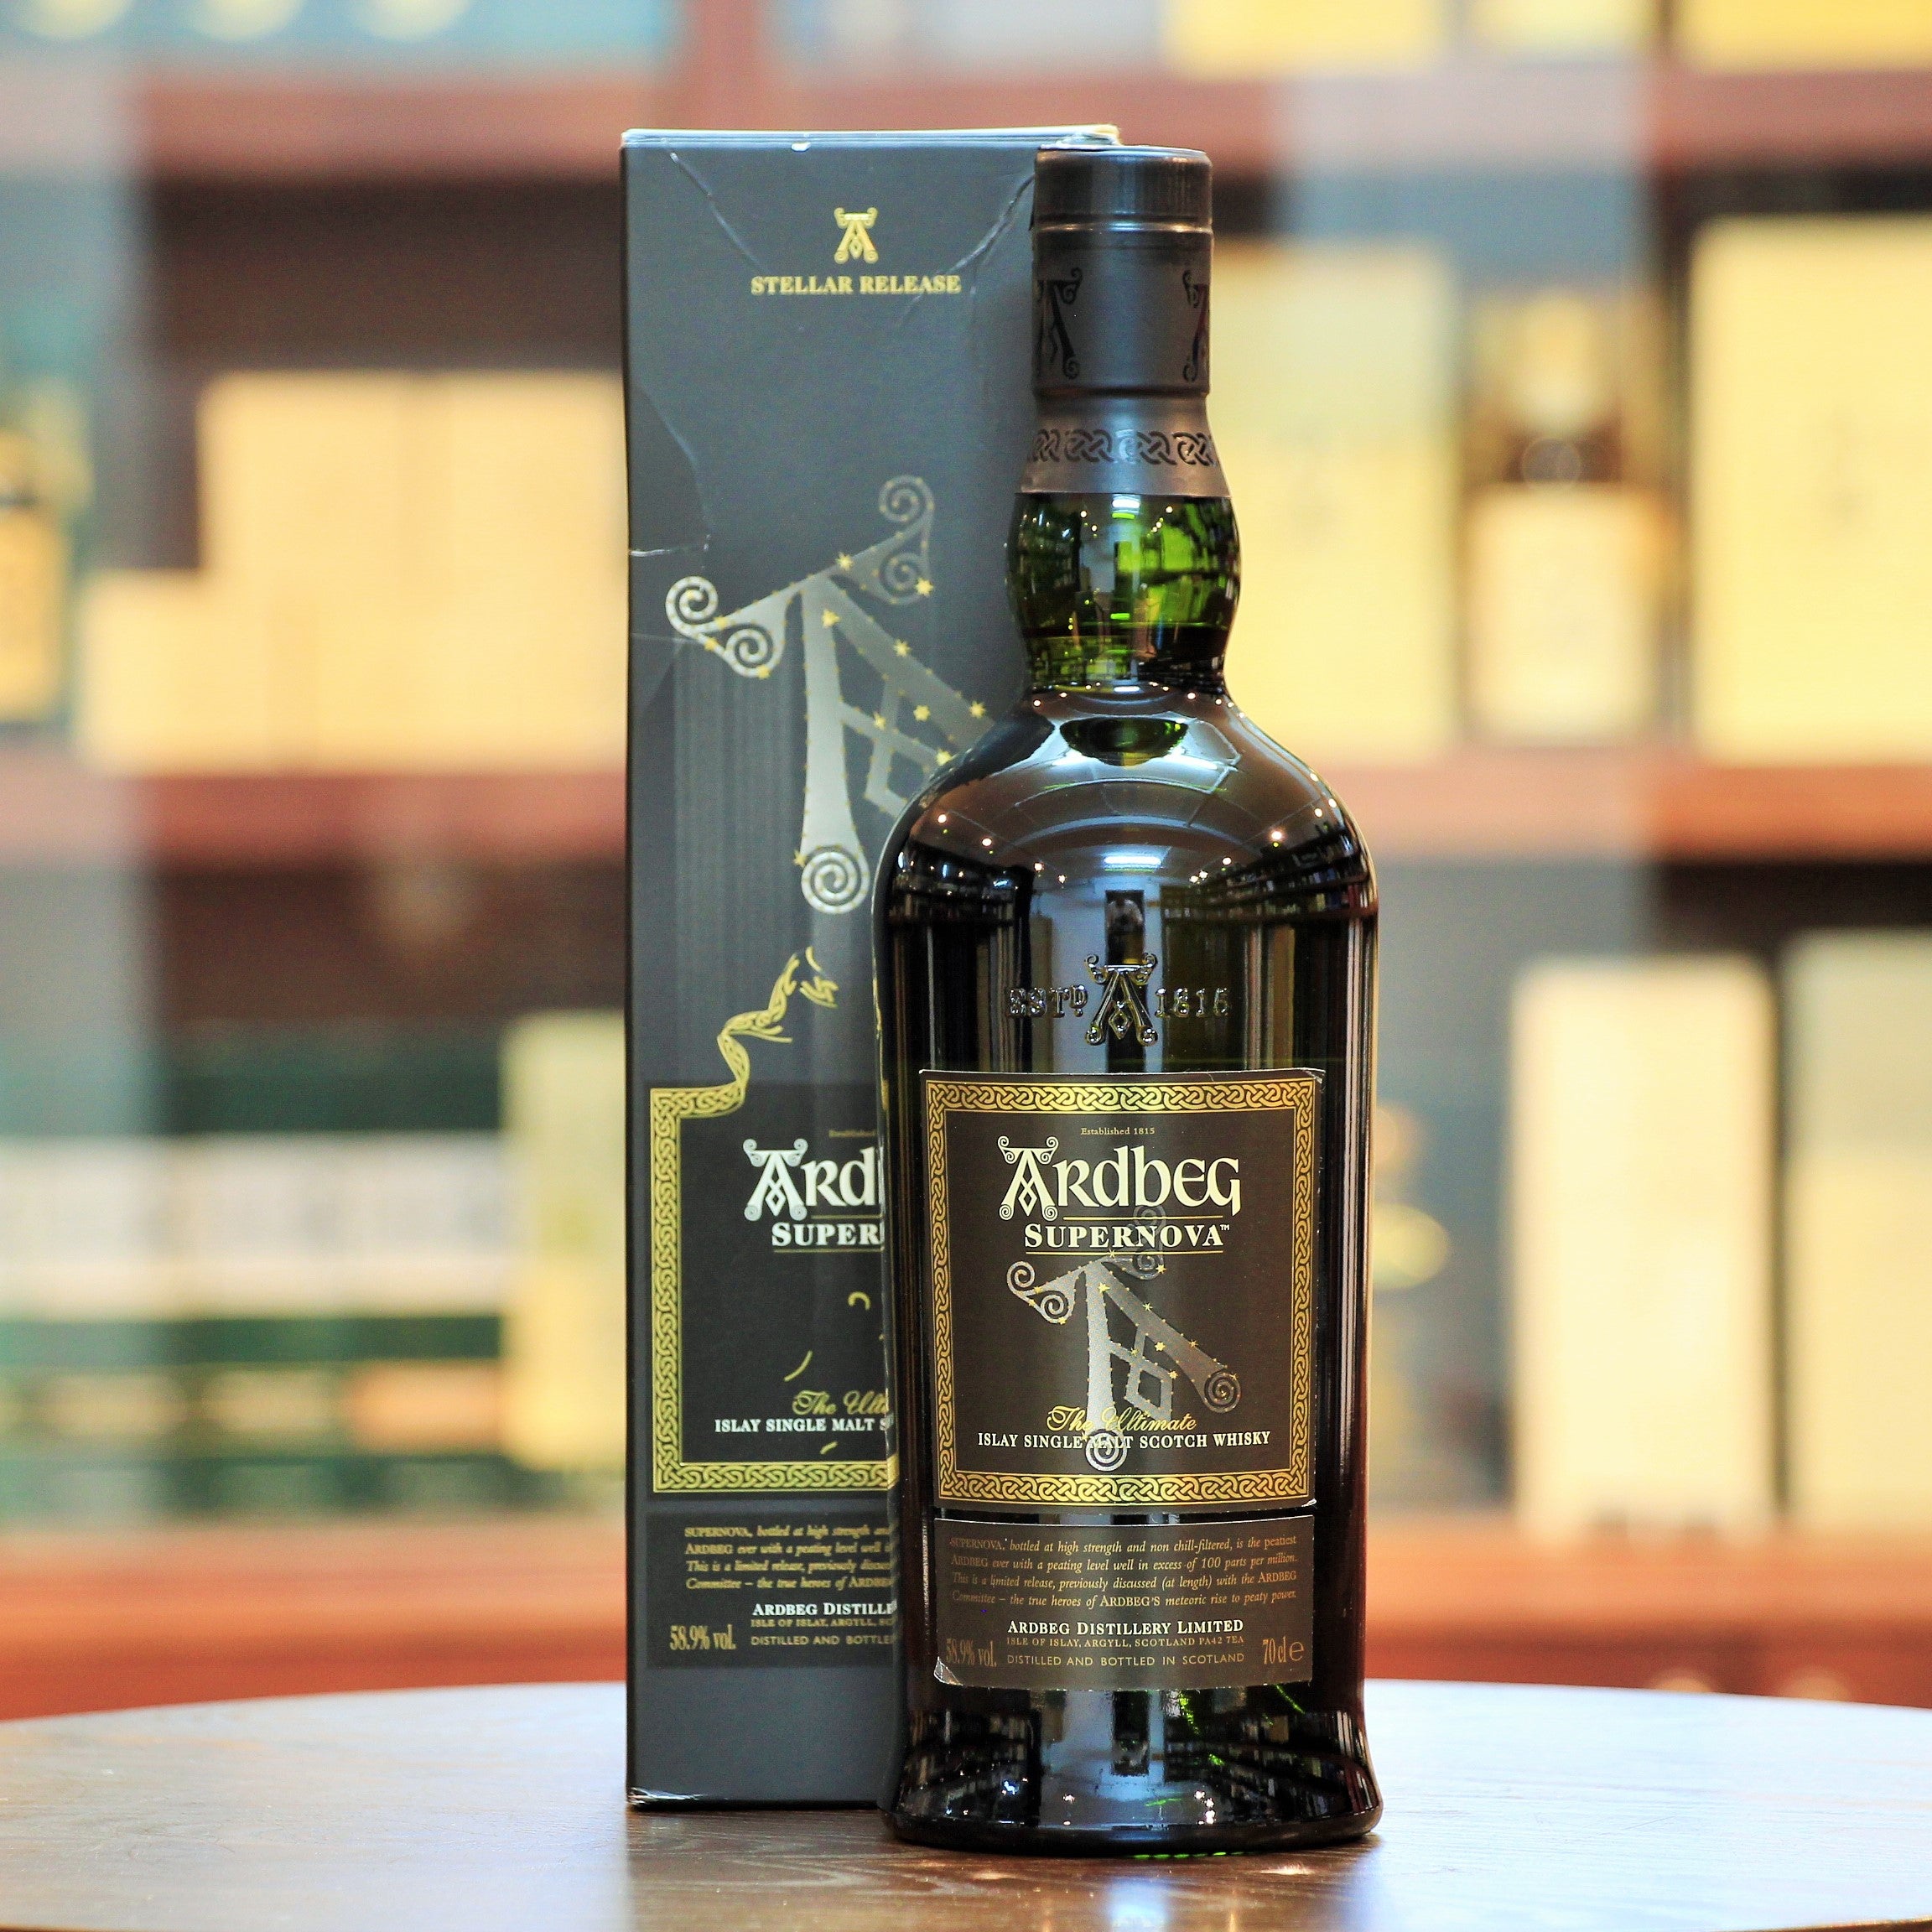 Ardbeg Supernova 2009 Islay Single Malt, First released in 2009, this remains one of the most peated Ardbegs. Whisky Bible 2010: Scotch Whisky of the Year; Second Finest Whisky in the World; 97 points